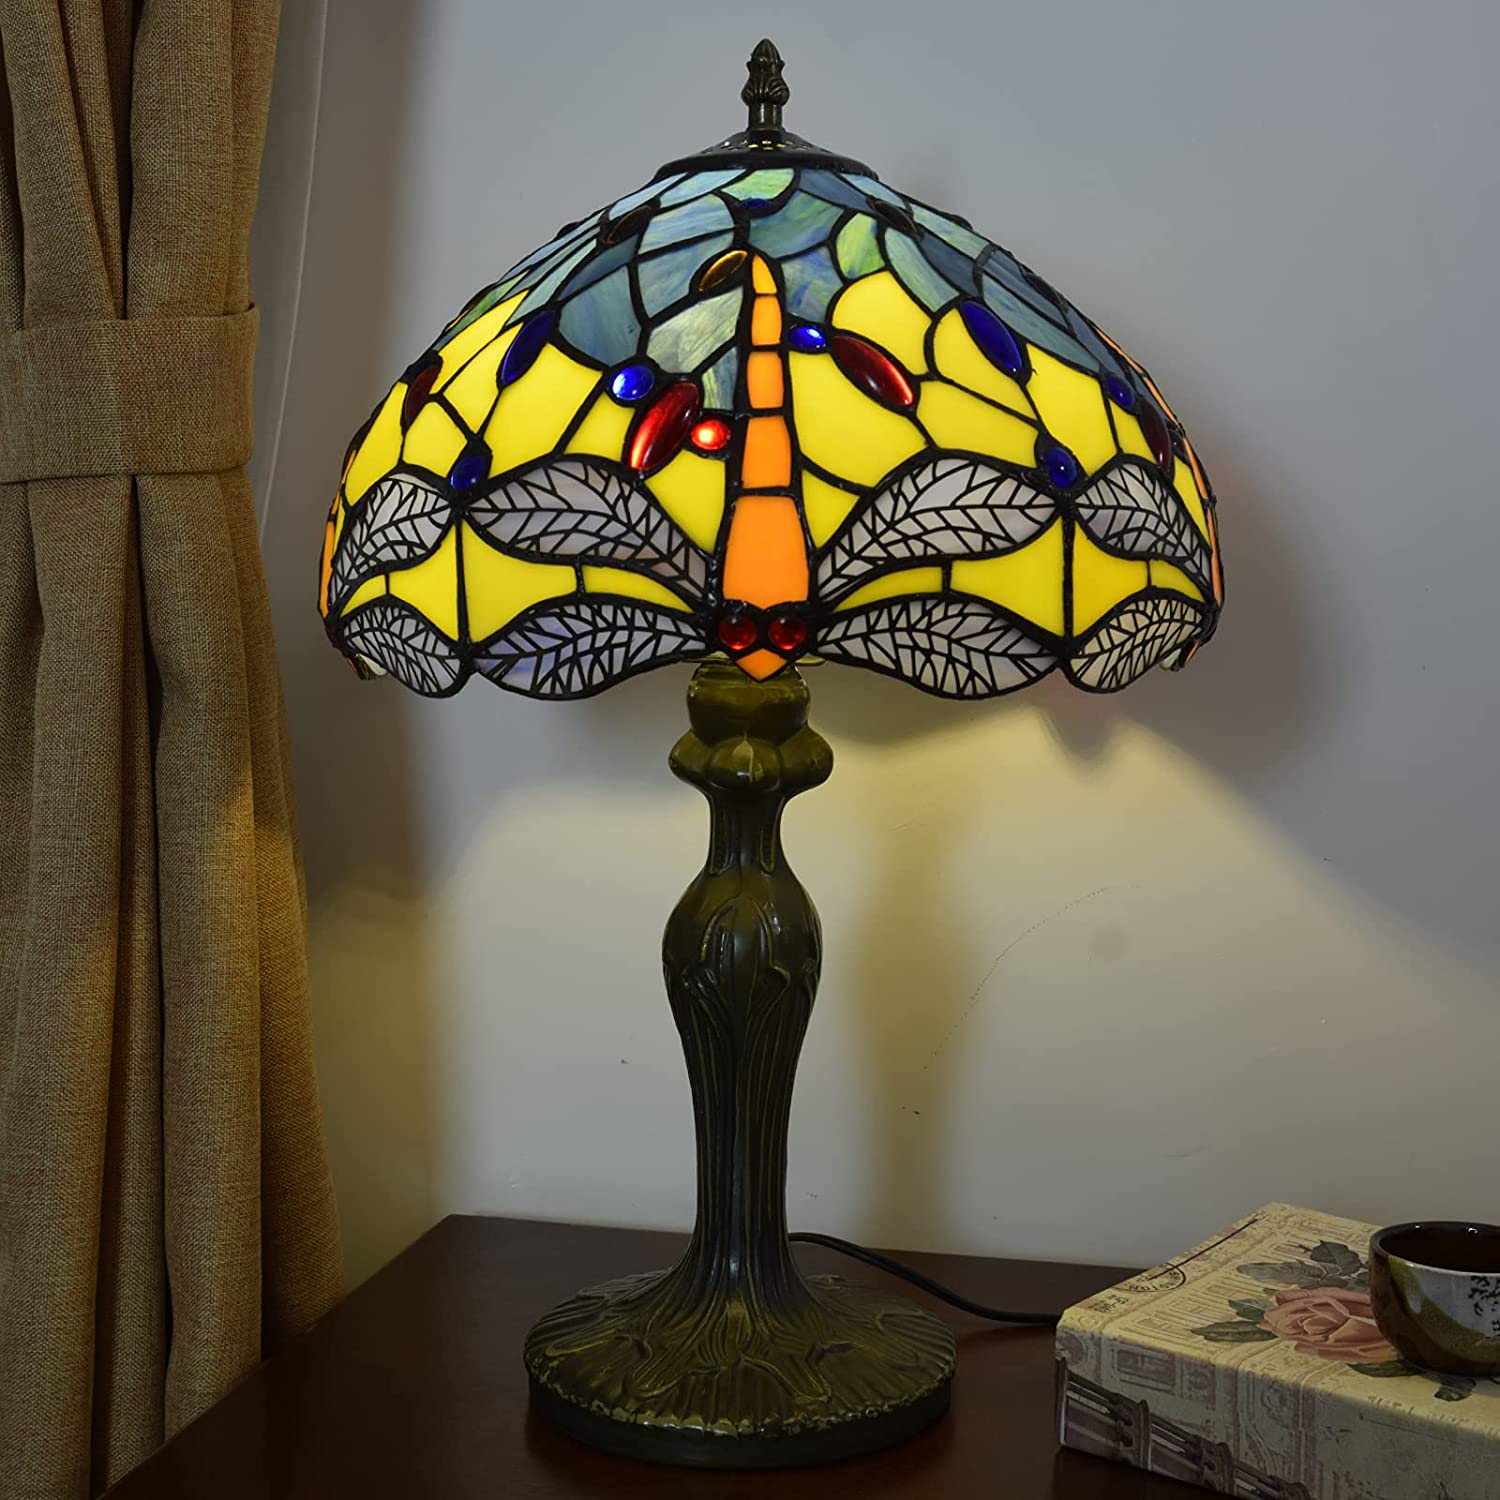 SHADY  Lamp Stained Glass Lamp Yellow Blue Dragonfly Bedroom Table Lamp Reading Desk Light for Bedside Living Room Office Dormitory Dining Room Decorate  12x12x18 Include Light Bul